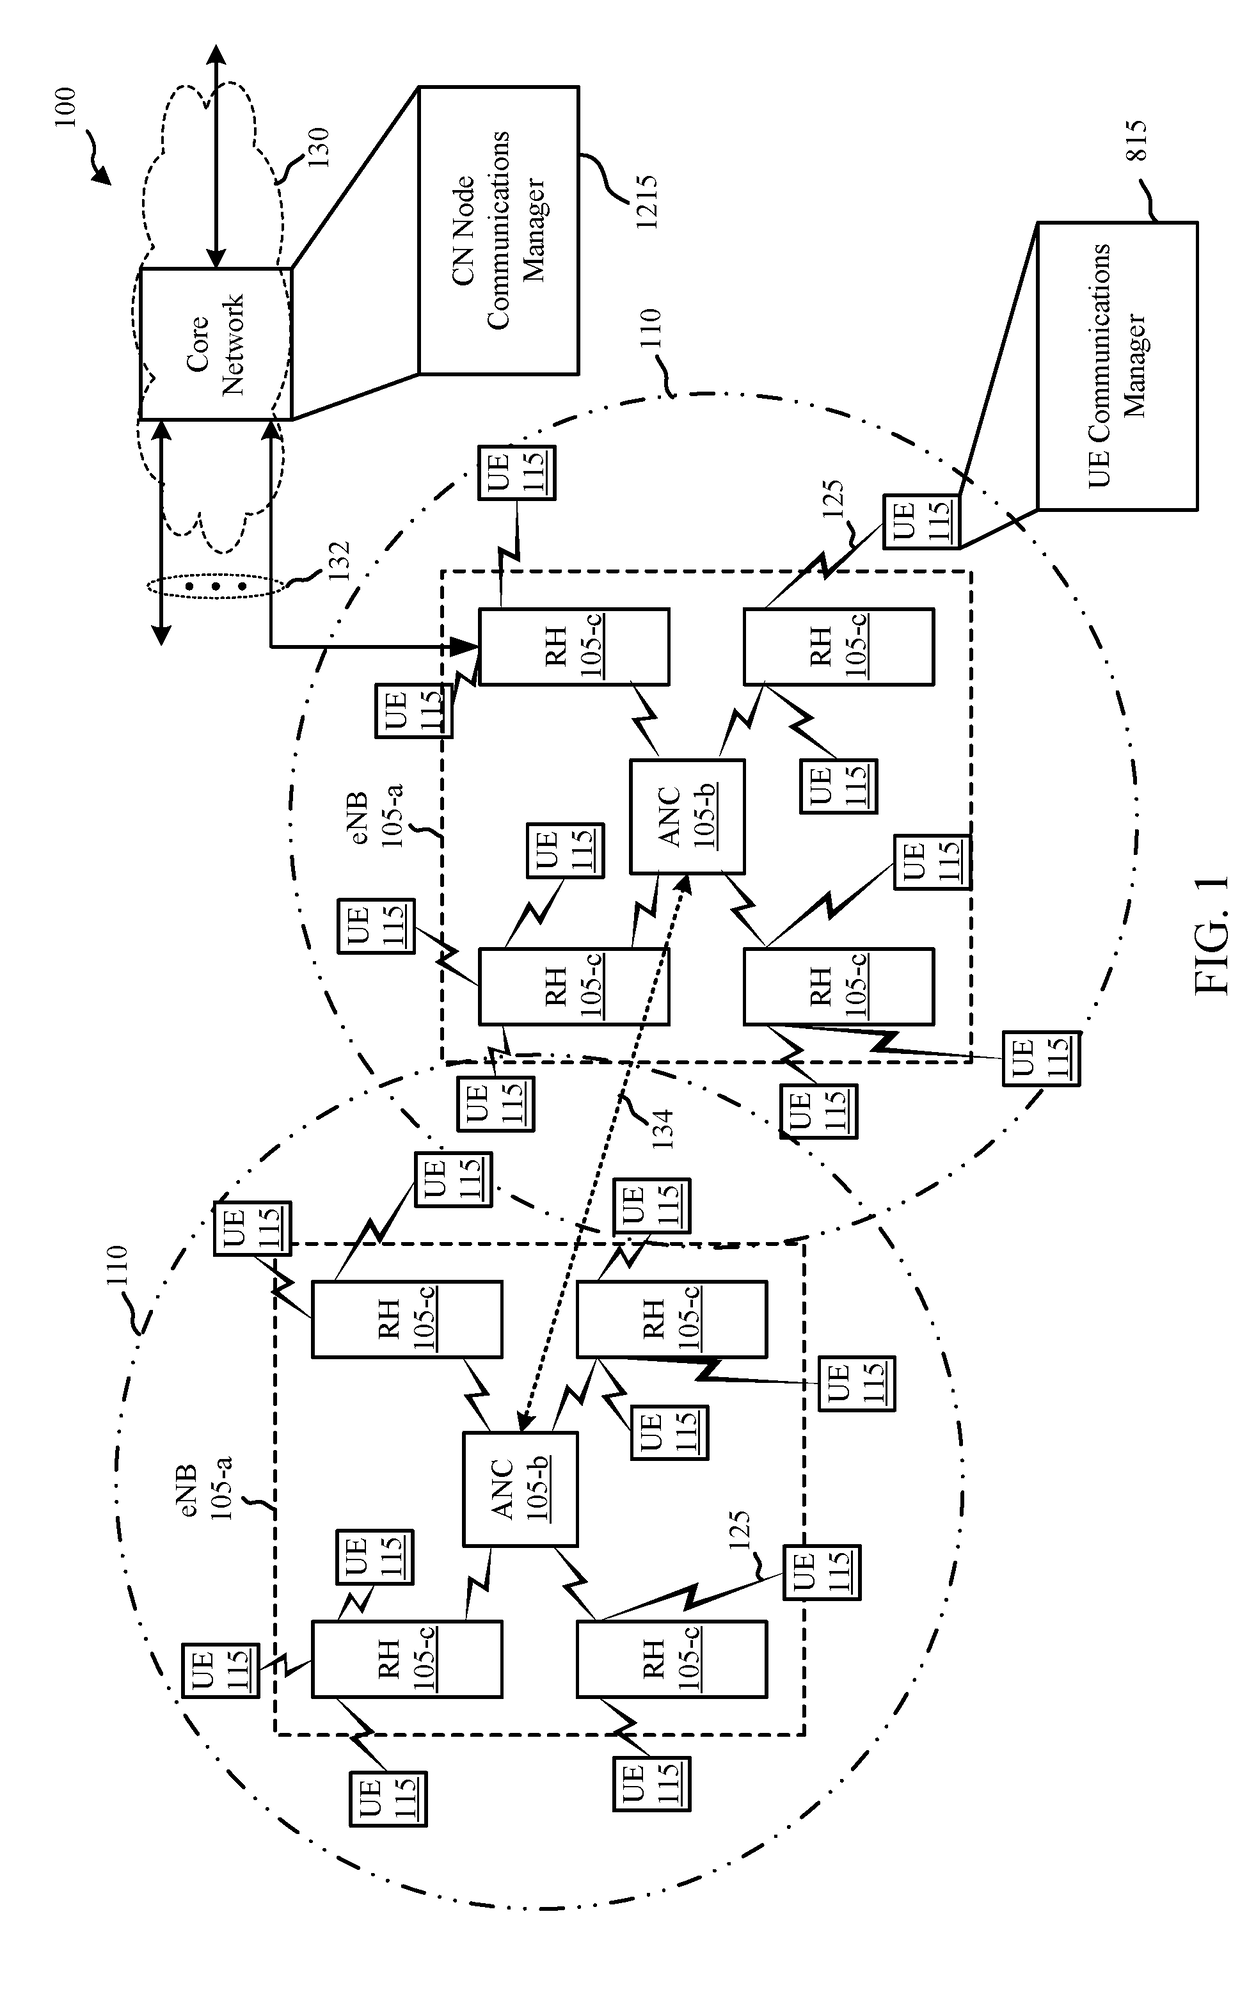 Connectivity to a core network via an access network